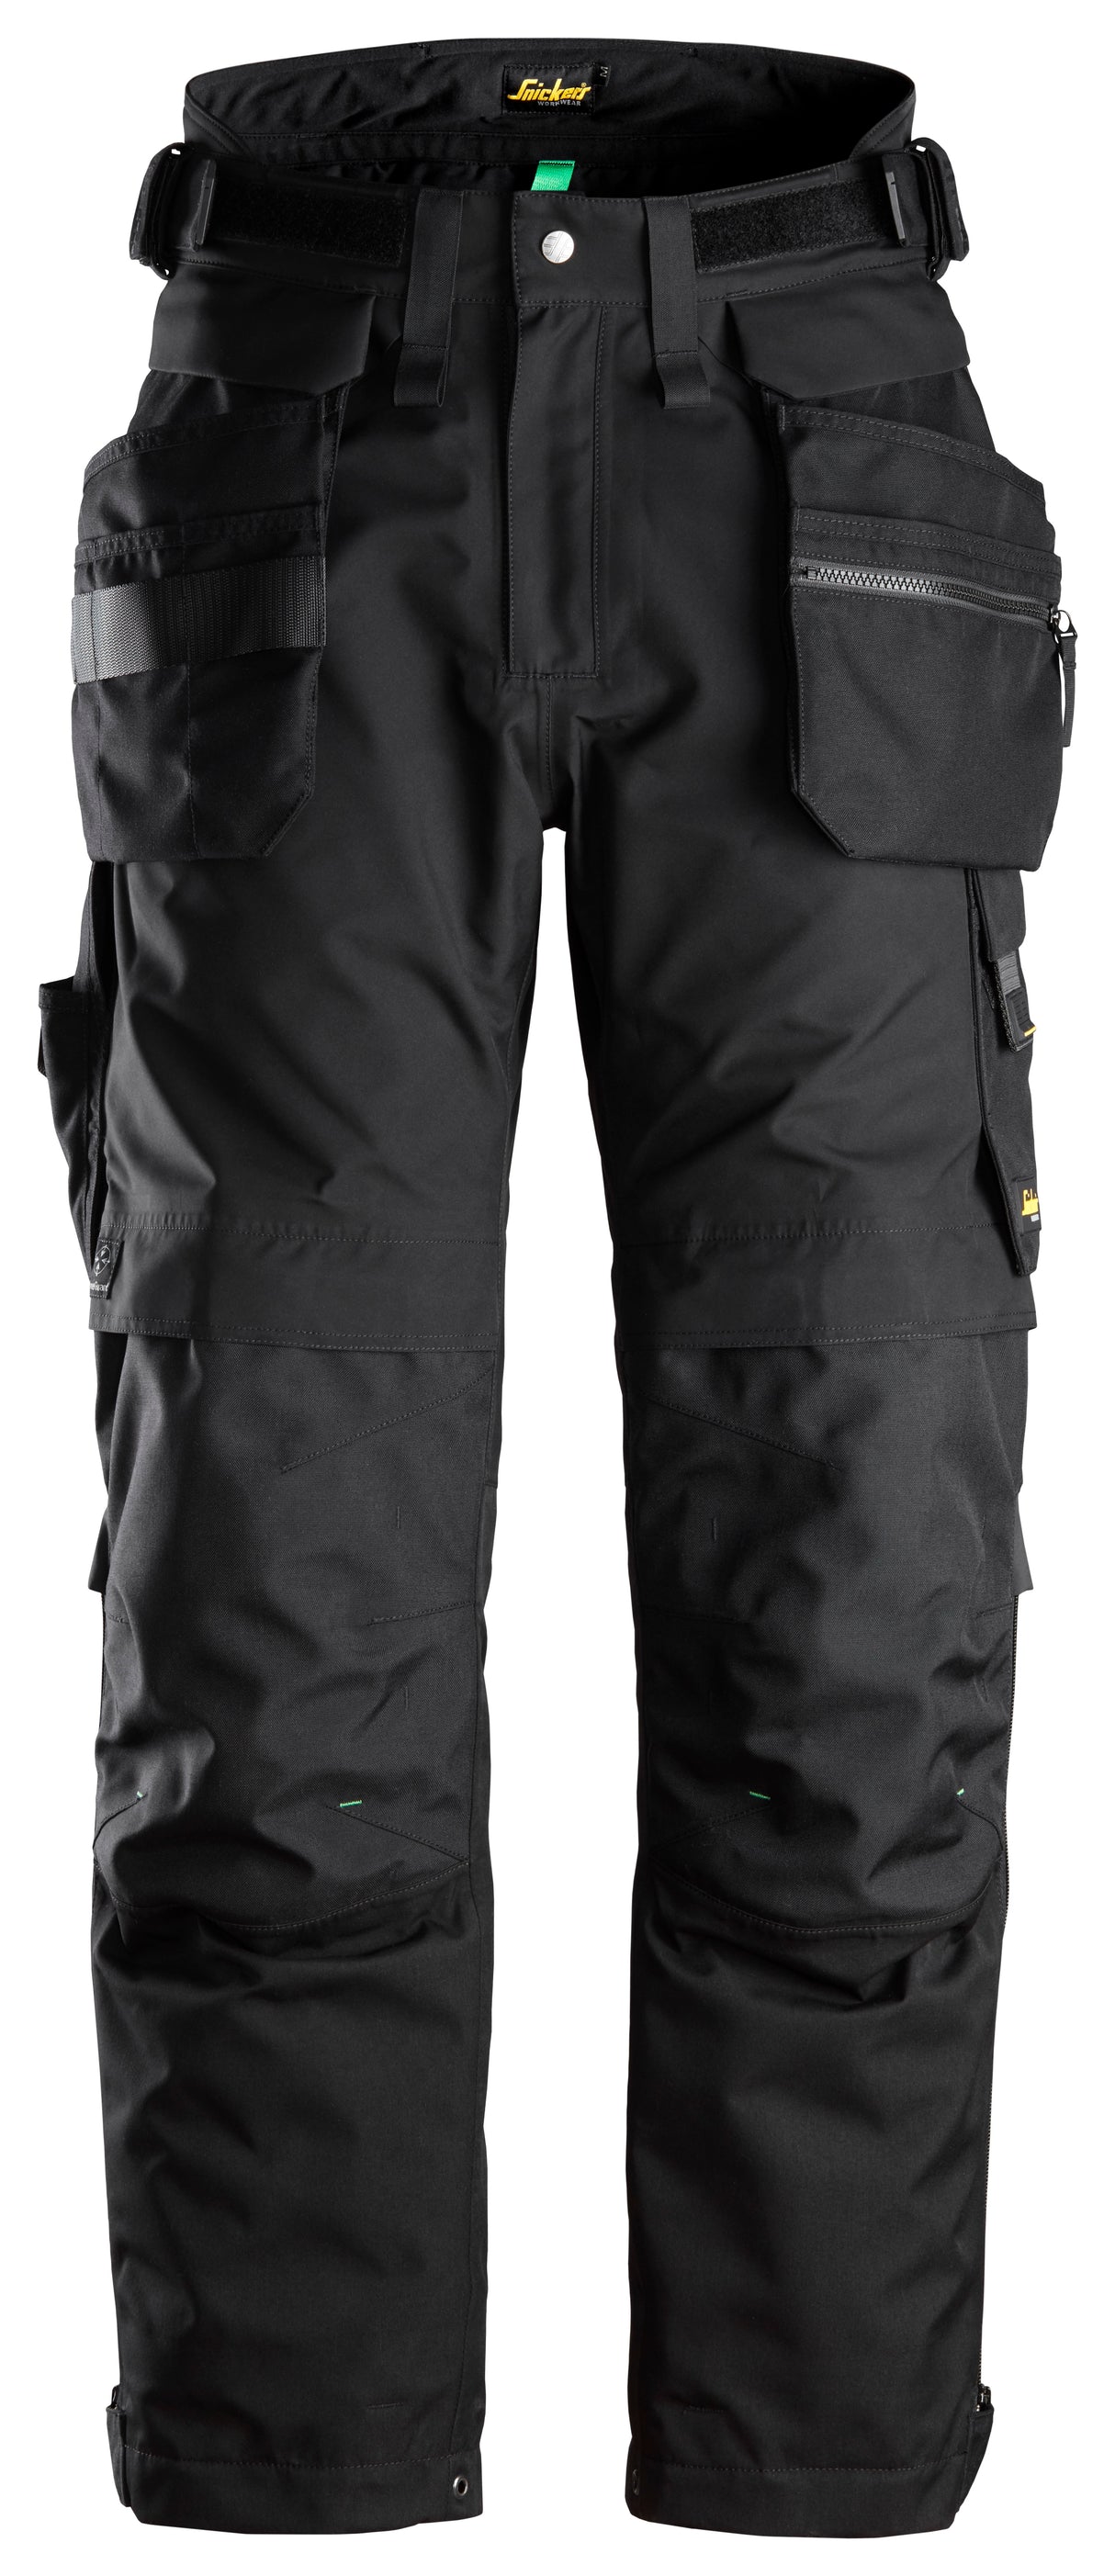 Snickers 6580 Flexiwork Gore-tex 37.5 Trousers Holster Pockets